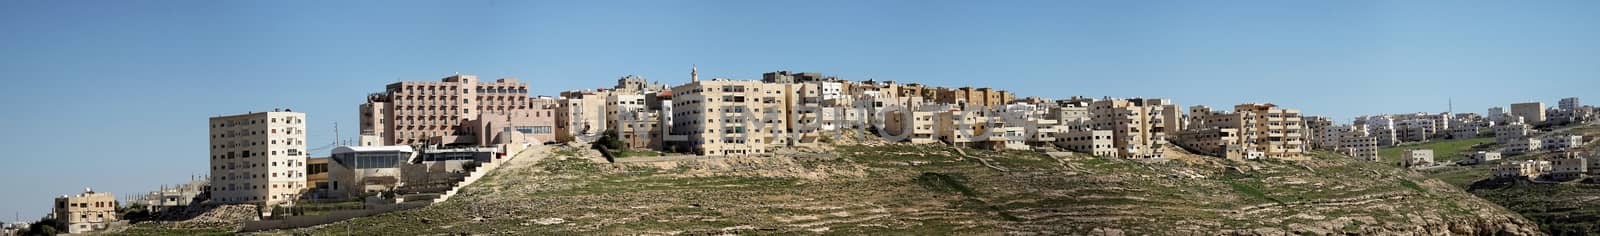 Composite high-resolution panorama of the high-rise housing estate on the outskirts of the city of Karak in Jordan. by geogif